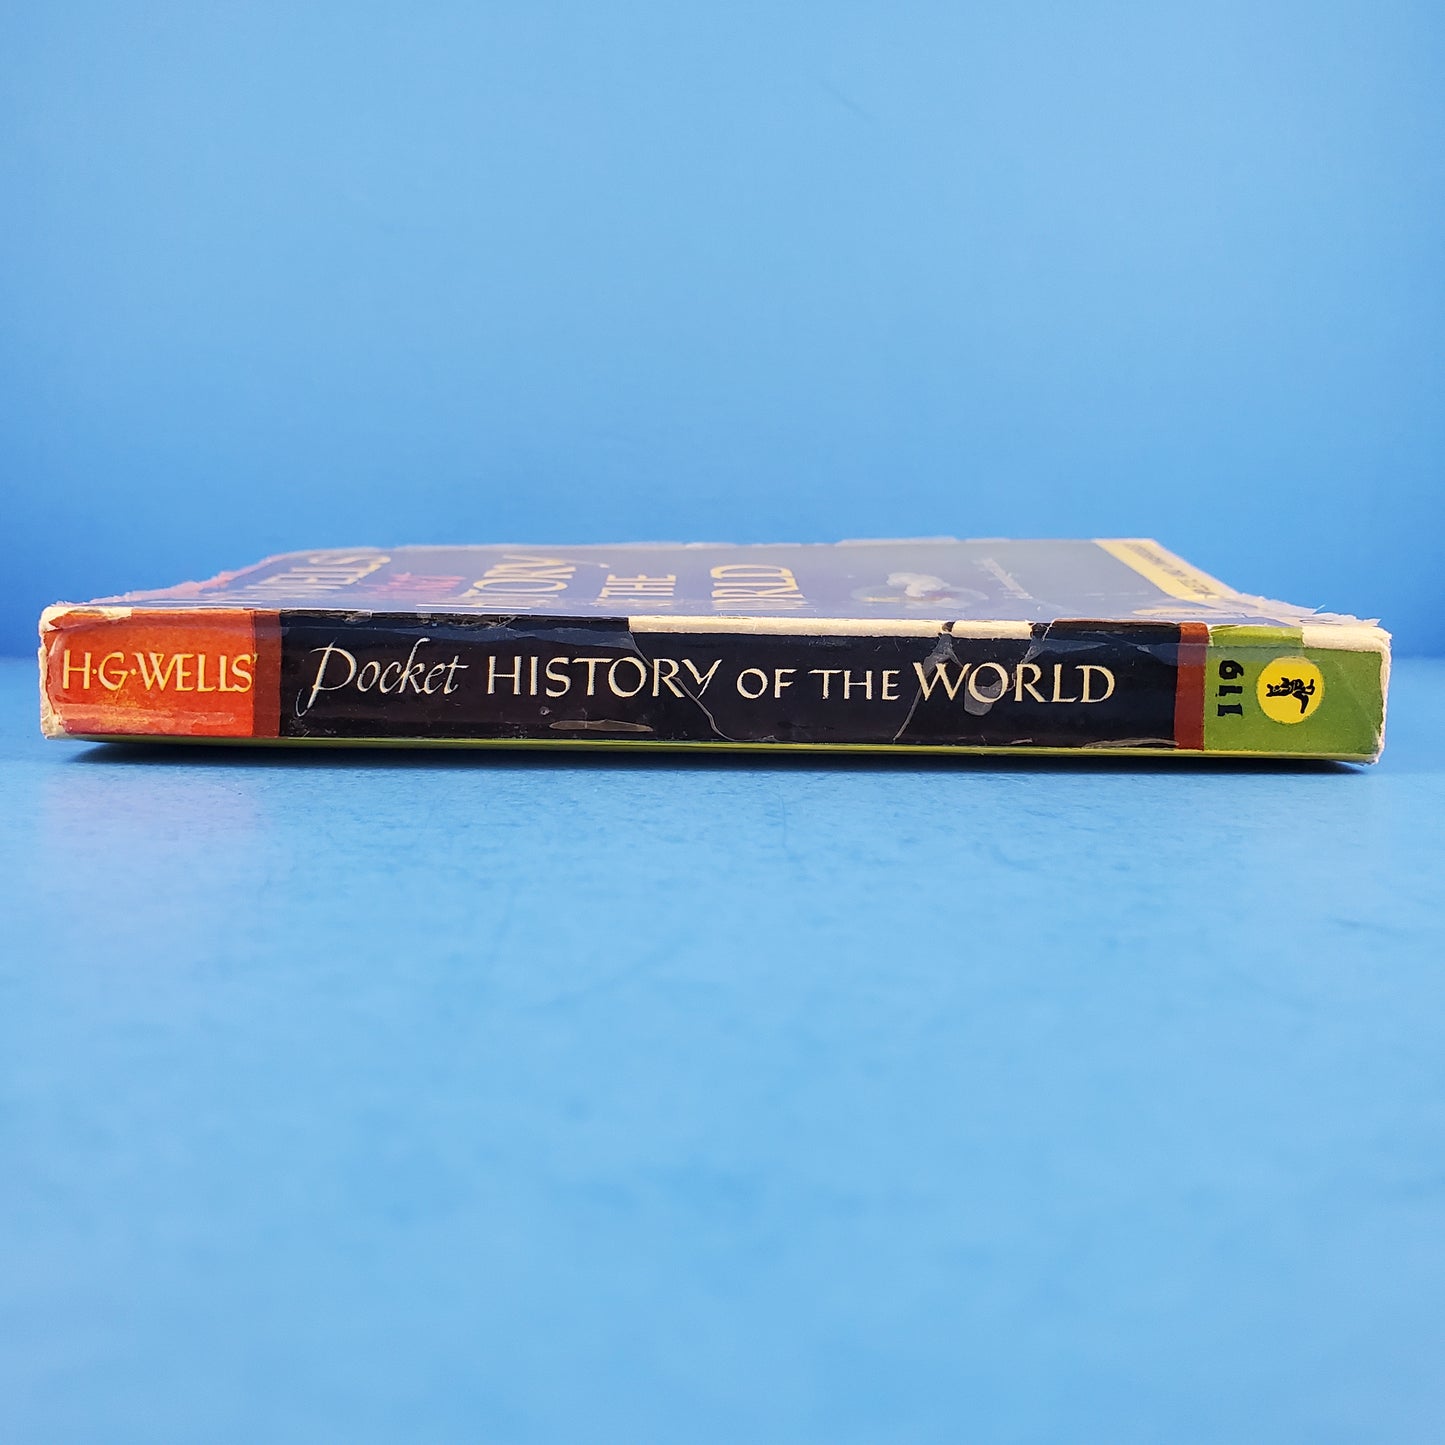 The Pocket History of the World